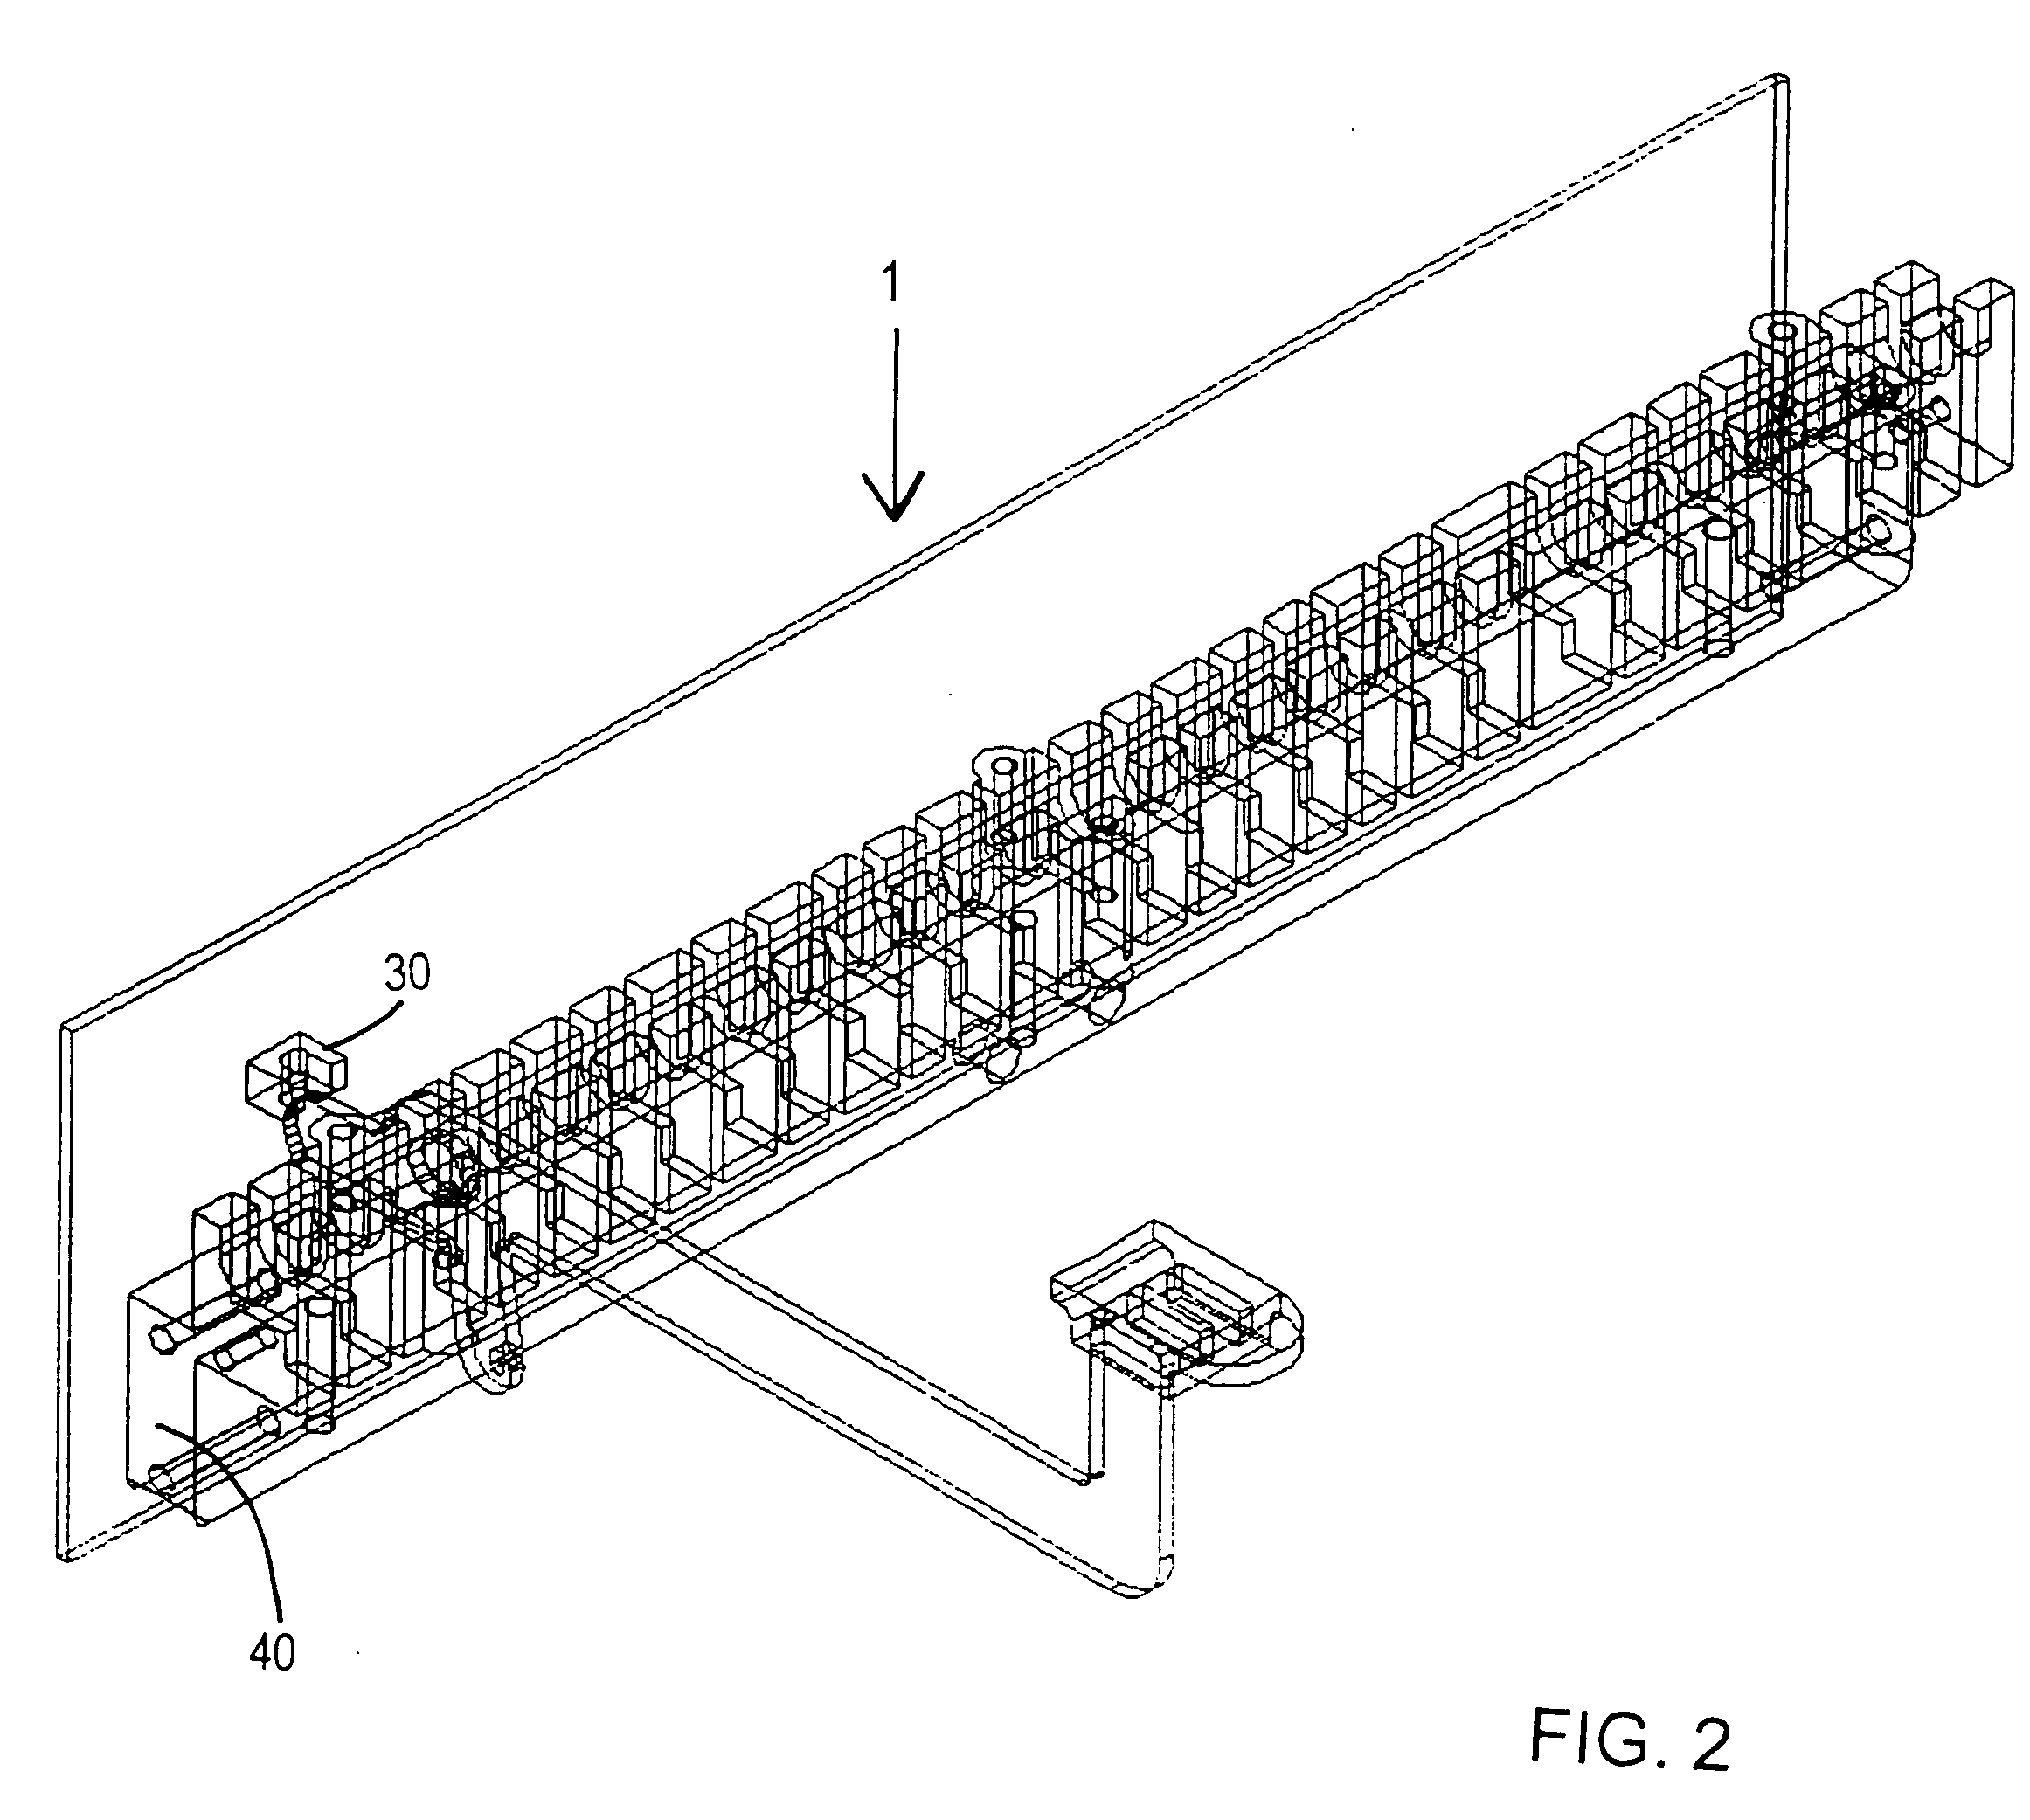 Electronic key depth sensing device and method for interpreting keystroke levels of the device